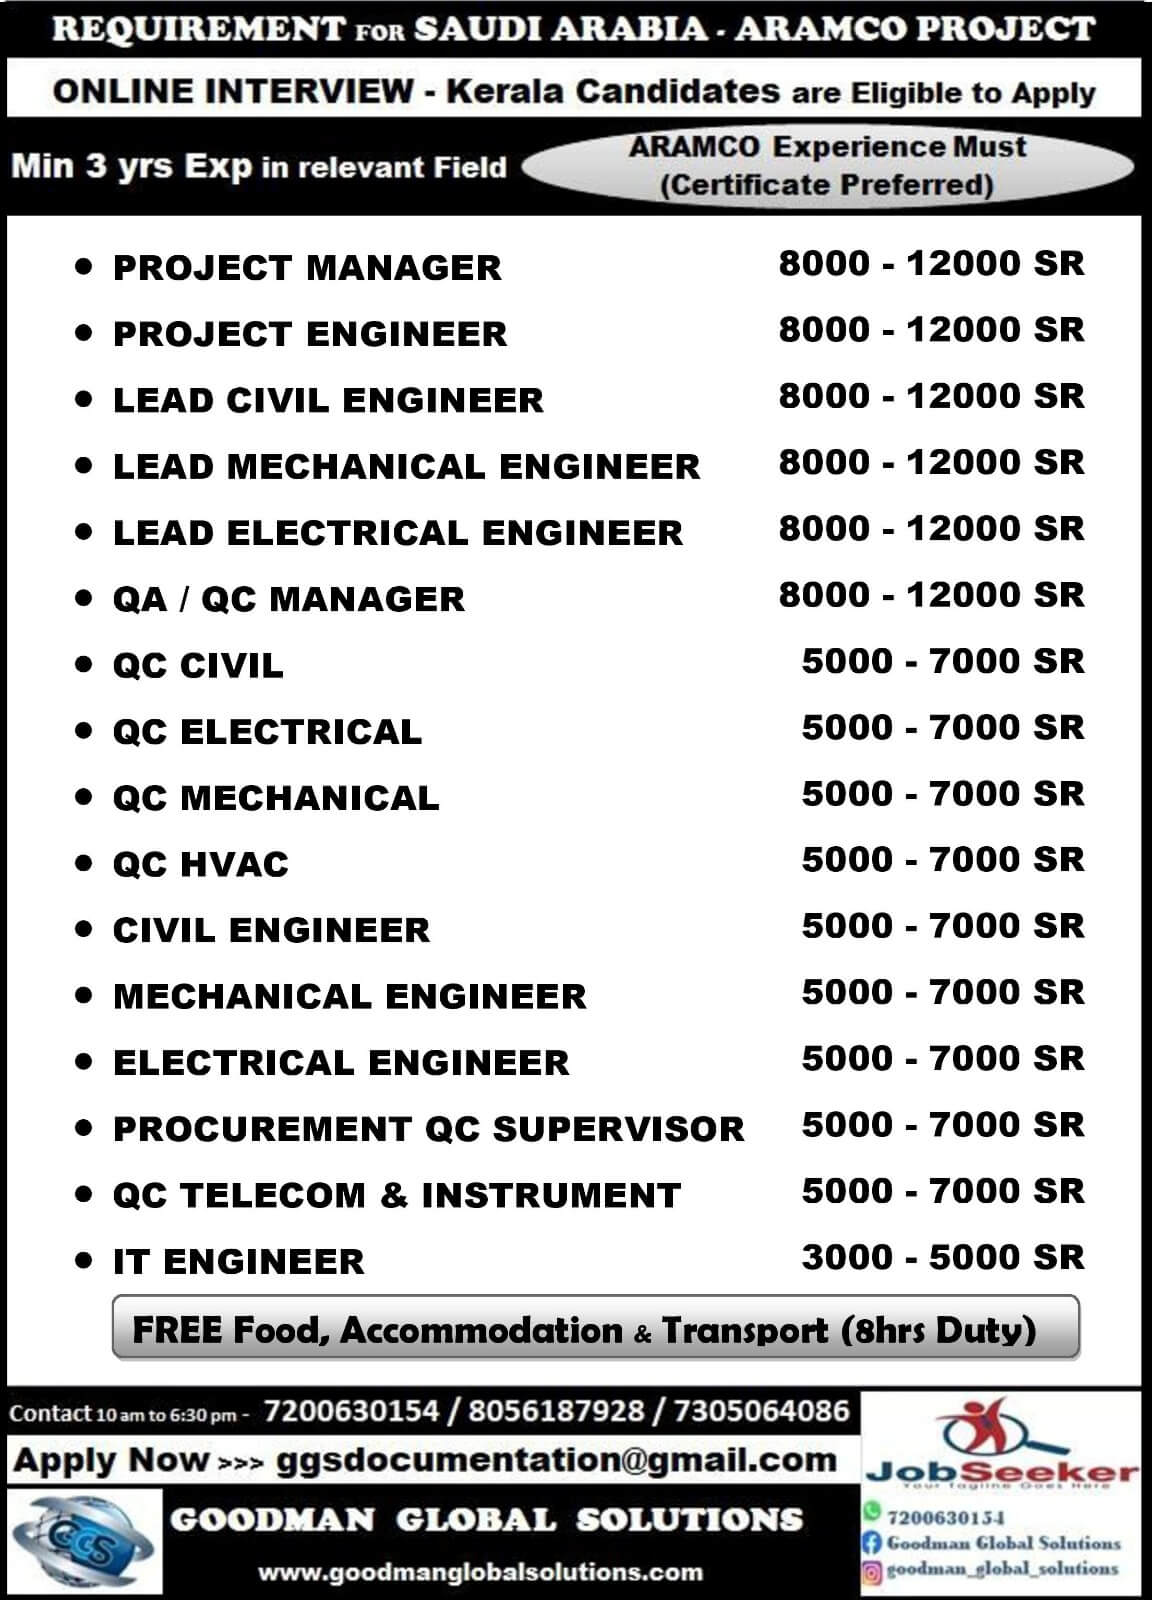 URGENT REQUIREMENT FOR SAUDI ARABIA – ARAMCO PROJECT  - ONLINE INTERVIEW CV SHORTLISTING PROCESS IN CHENNAI KERALA Candidate can are Eligible to apply. Min 3 yrs Exp in Relevant Field ARAMCO EXP Must.